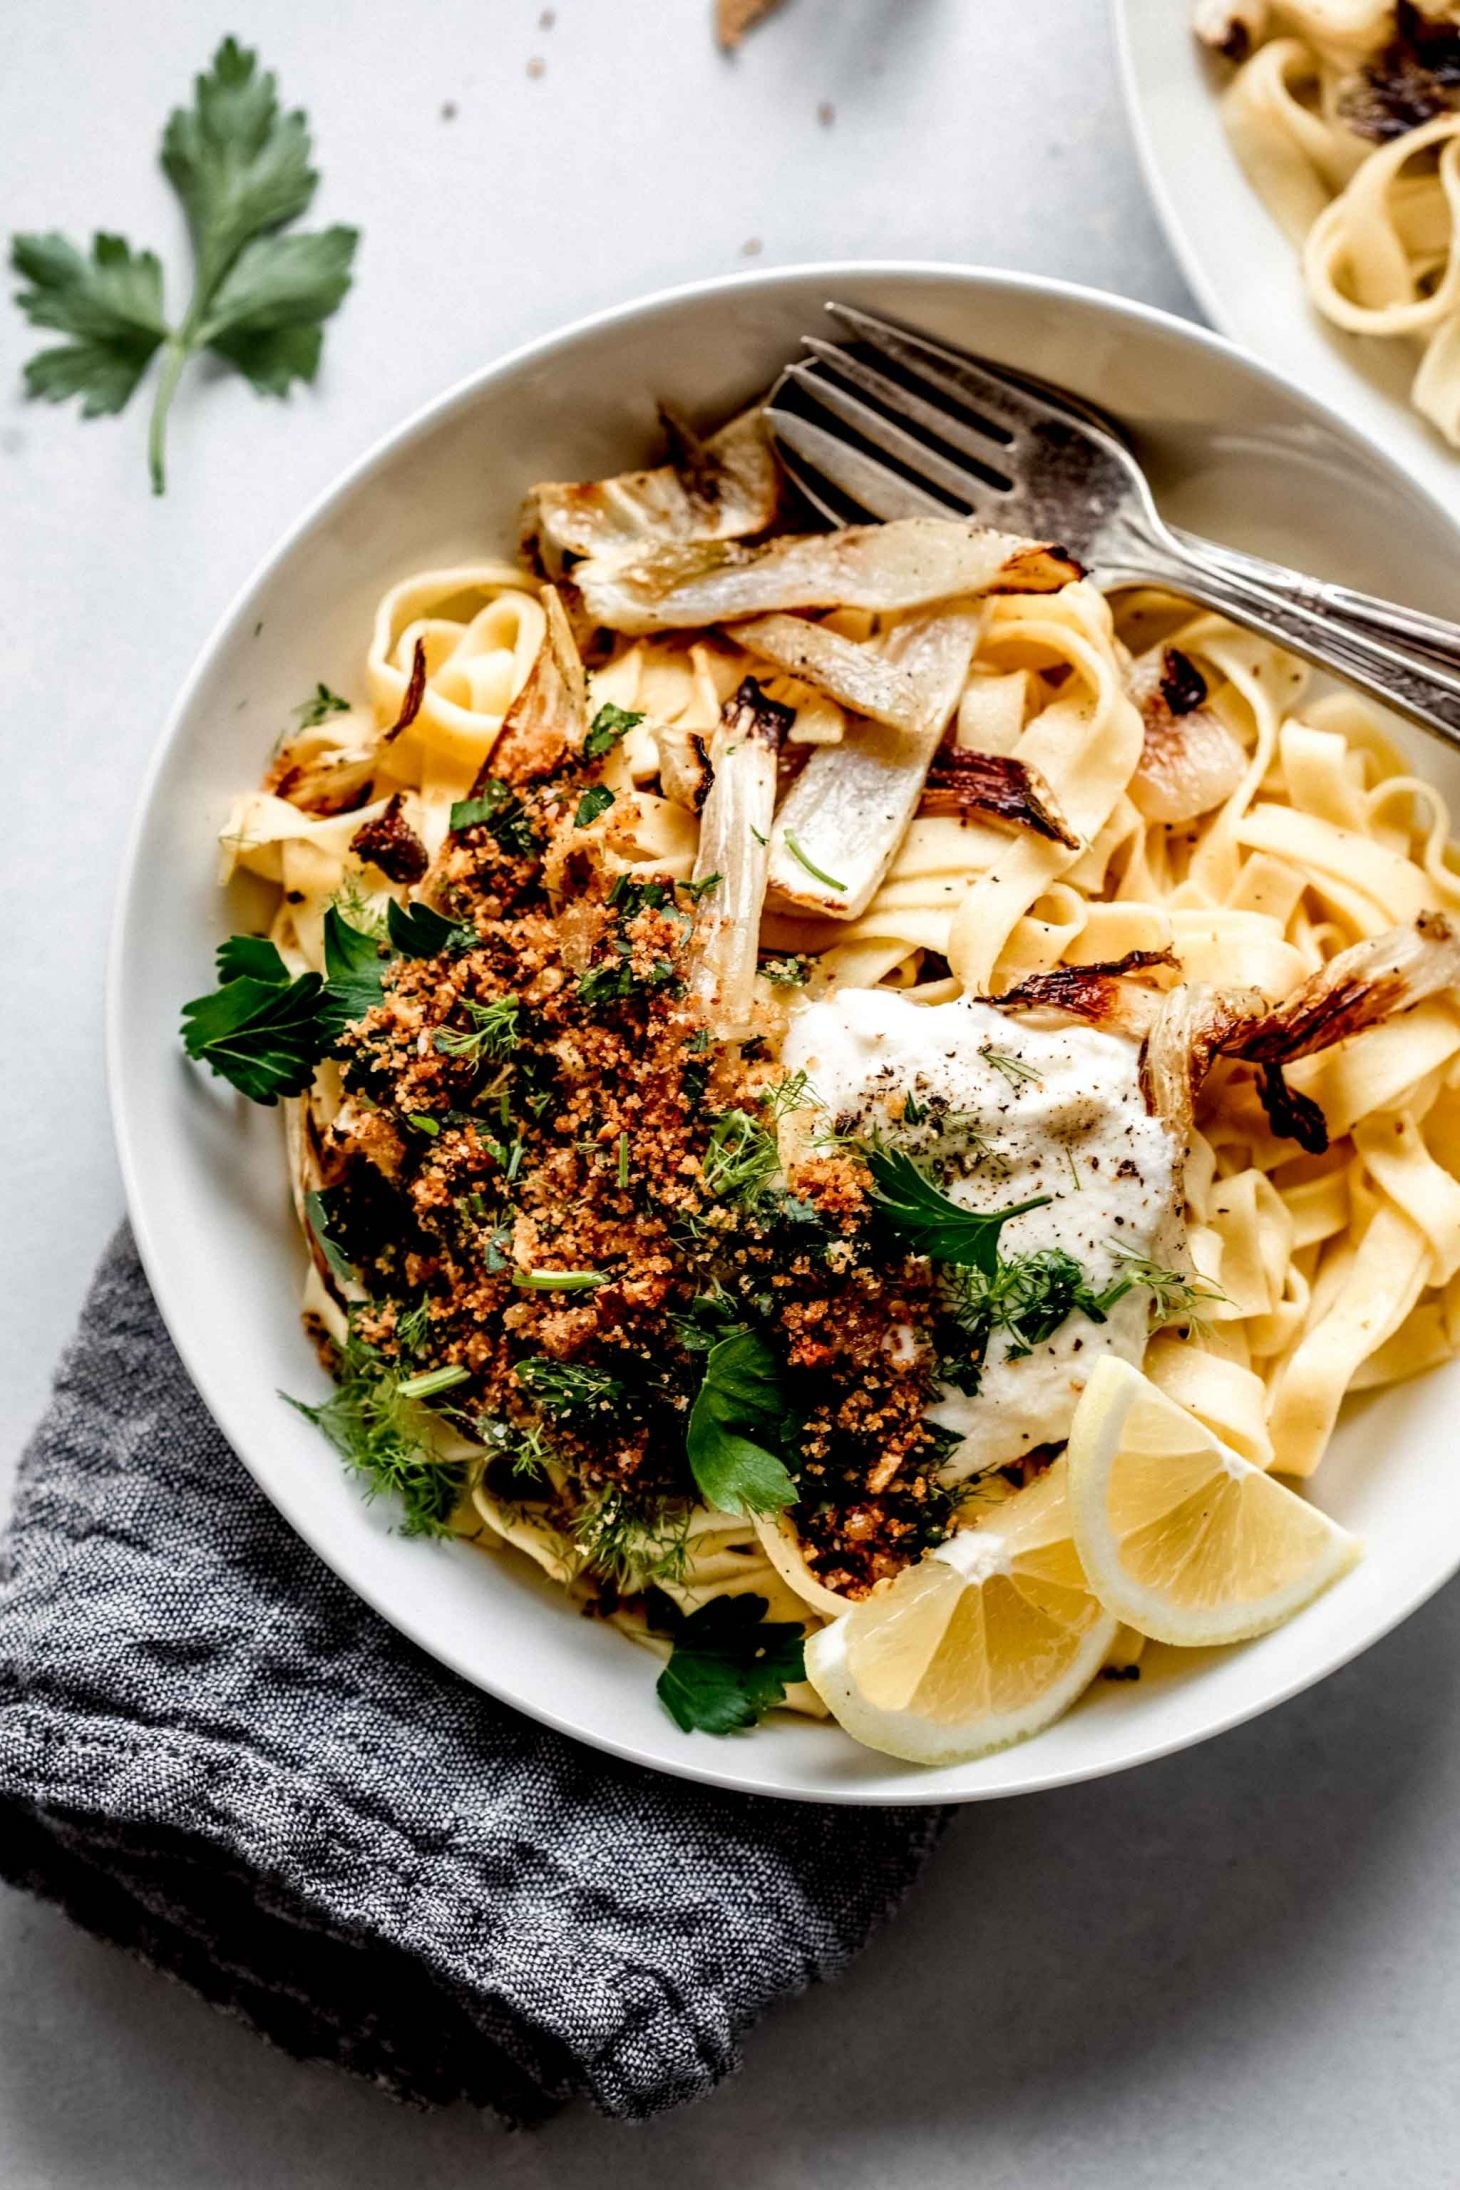 A plate of thick, long noodles with roasted fennel, bread crumbs, ricotta, and herbs.